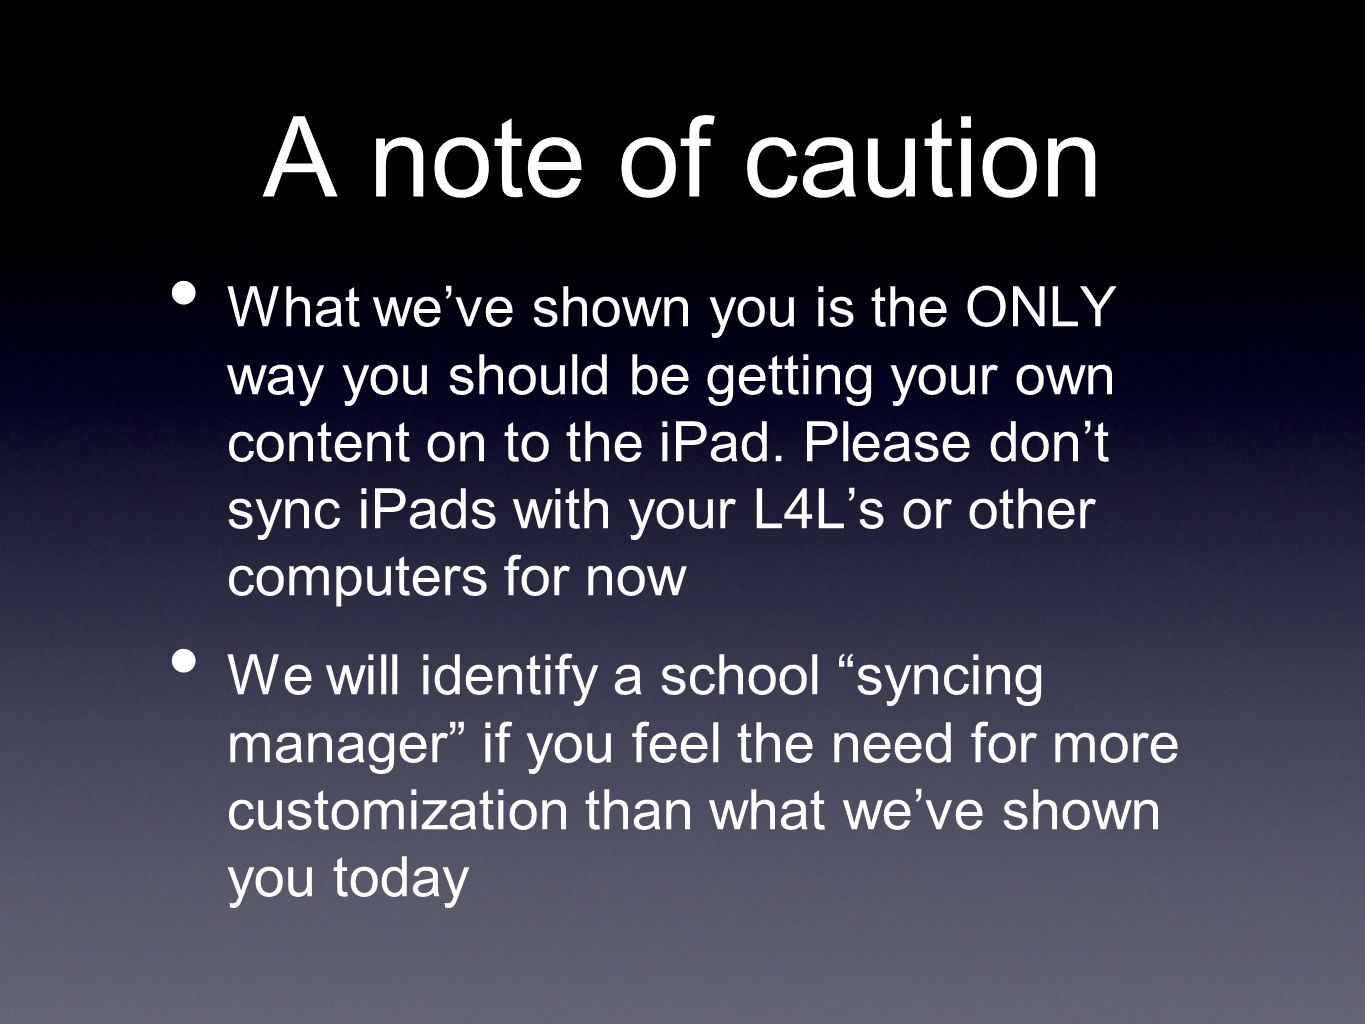 A note of caution What we’ve shown you is the ONLY way you should be getting your own content on to the iPad.